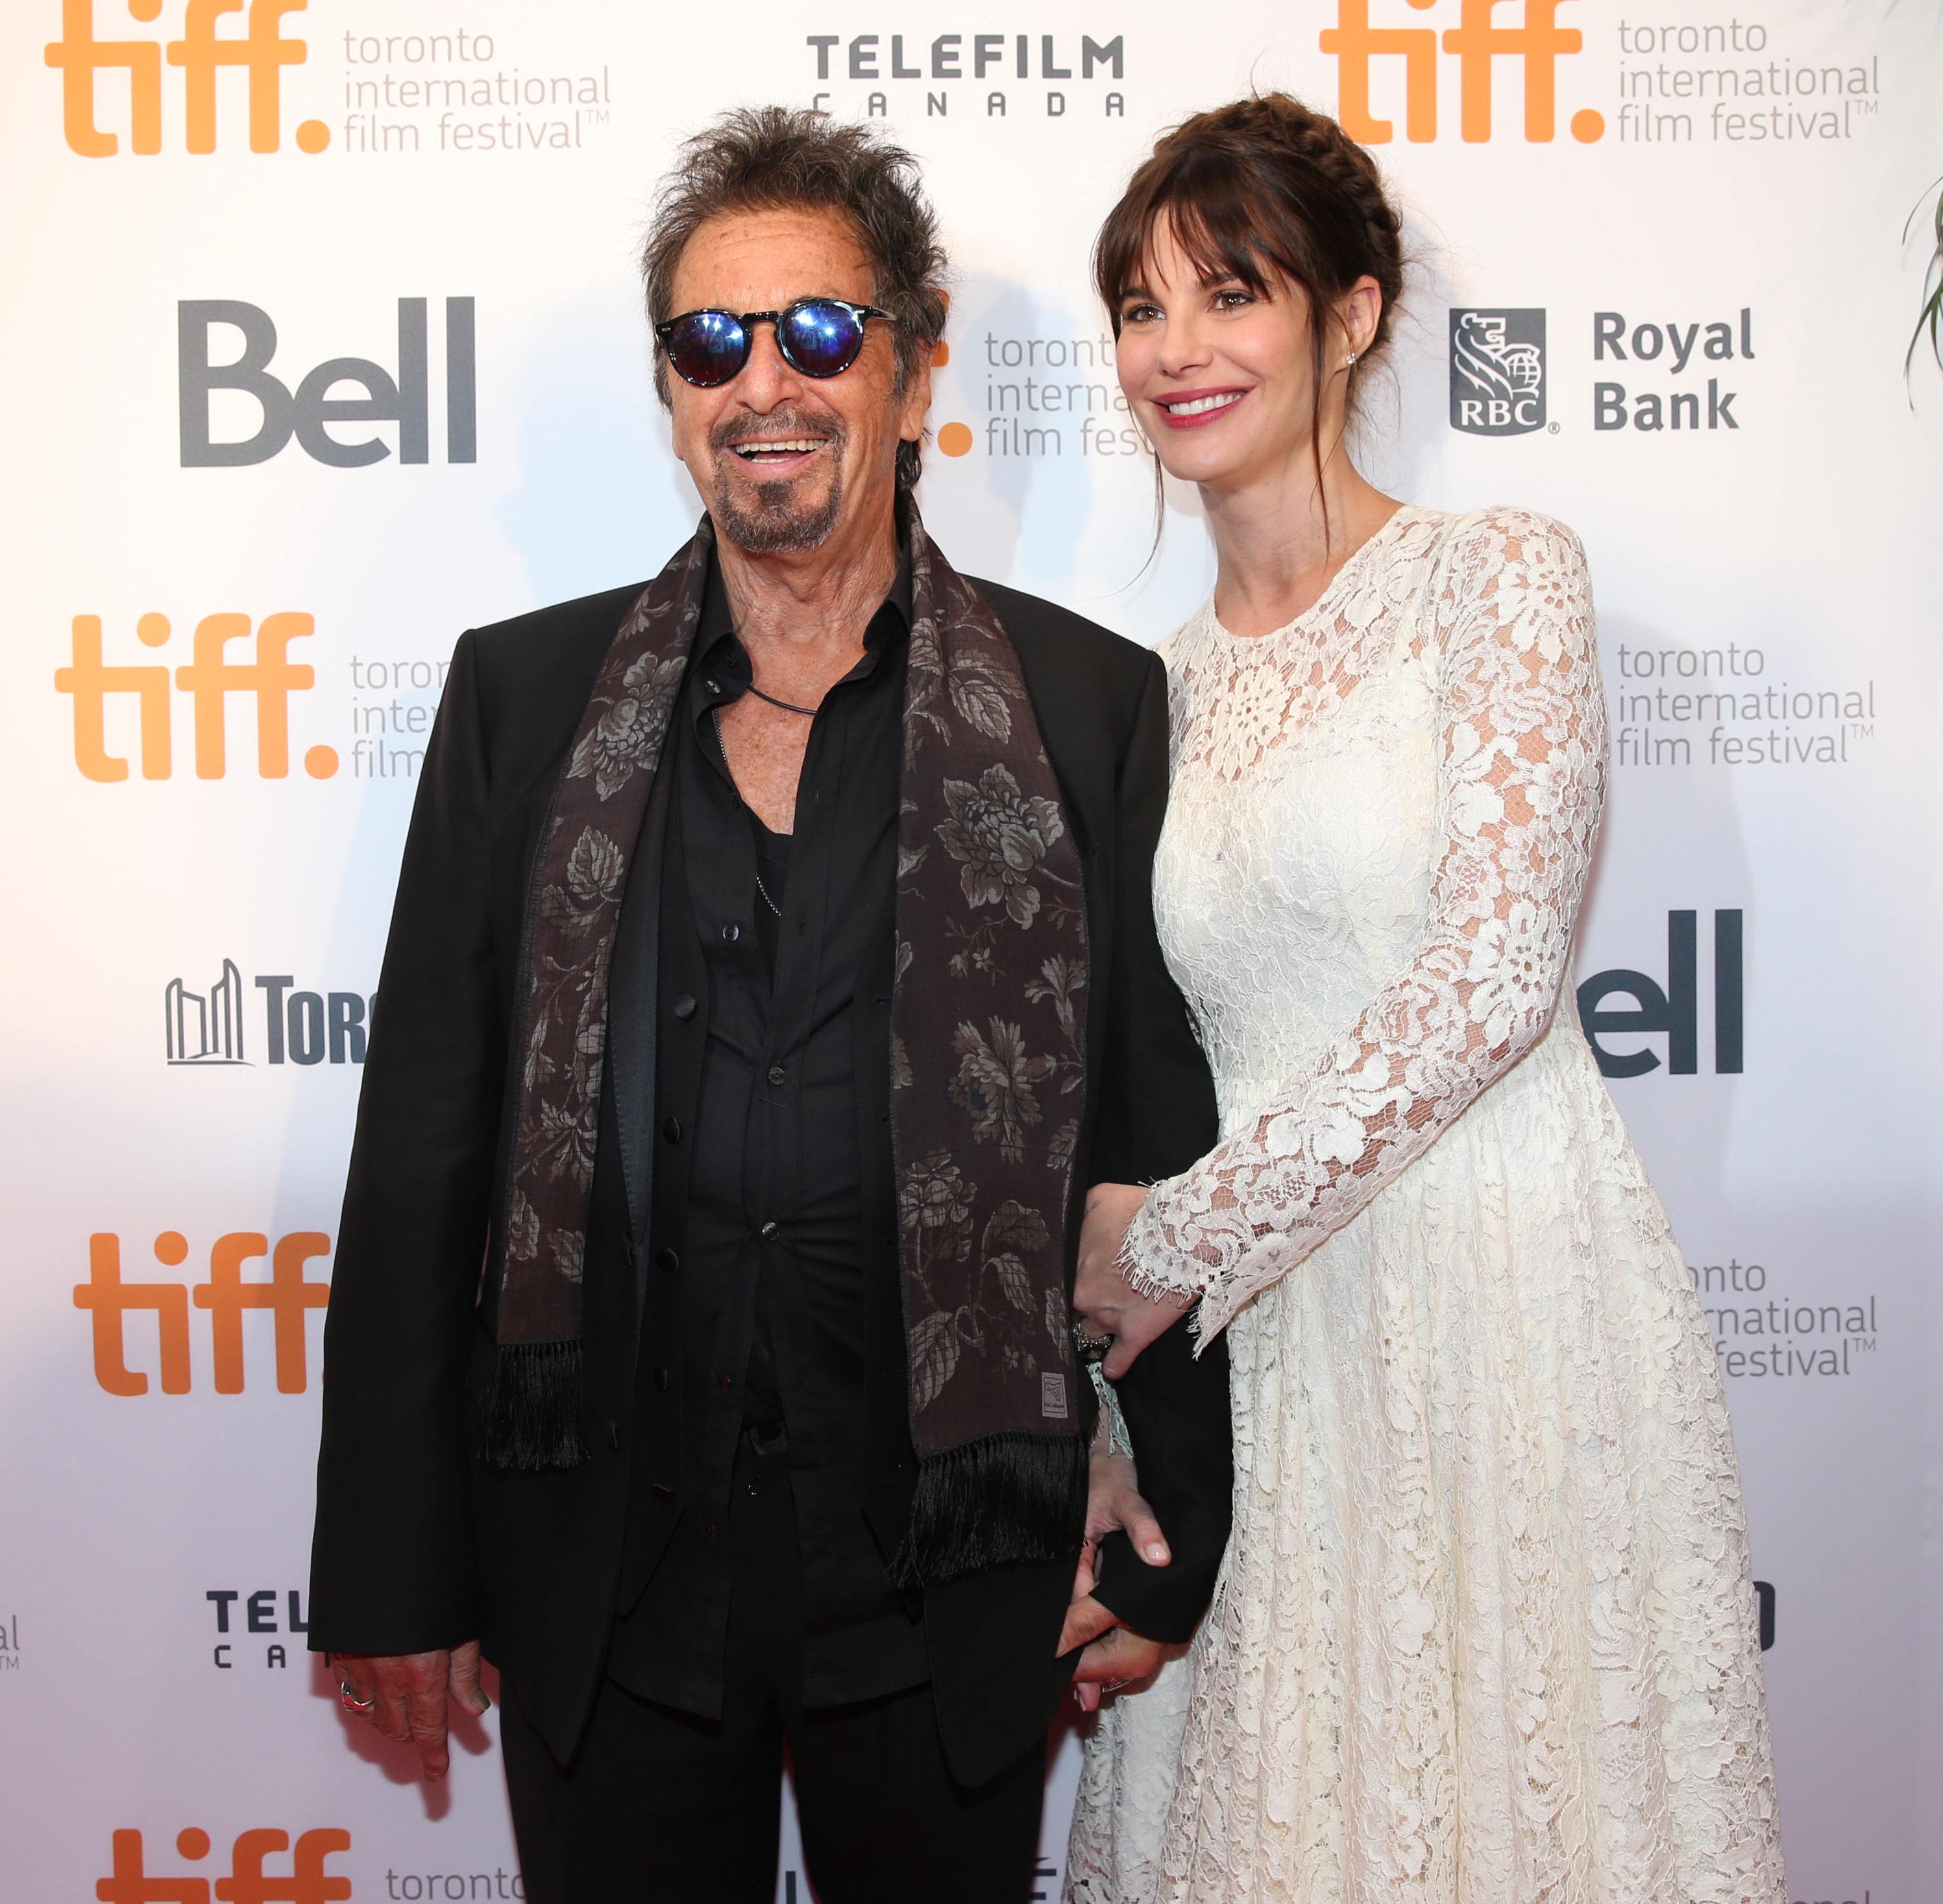 Al Pacino and Lucila Solá walk the red carpet at the TIFF gala in the TIFF Bell Lightbox Reitman Square on September 3, 2014, in Toronto, Ontario. | Source: Getty Images